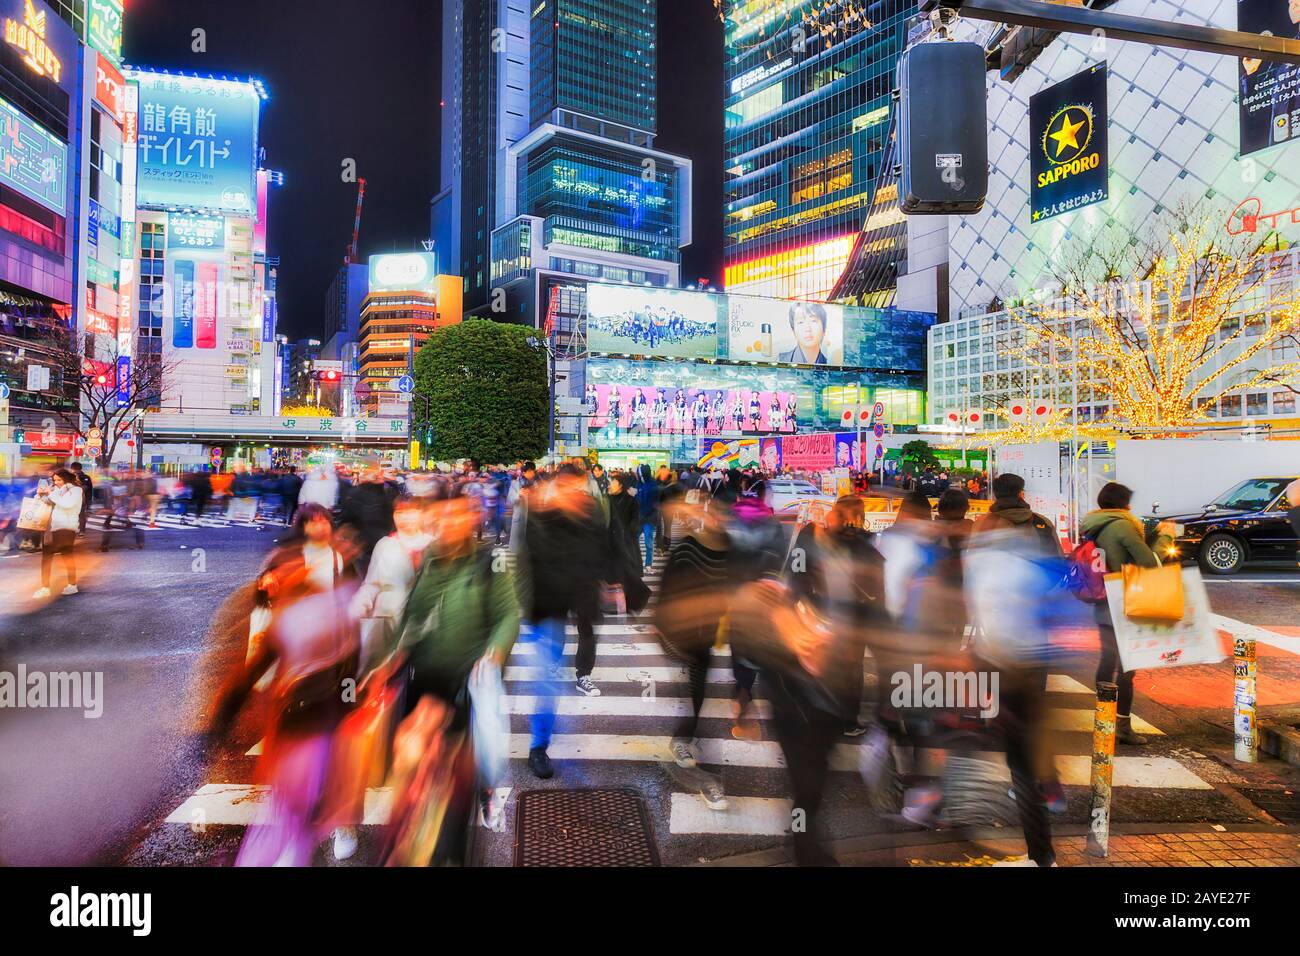 Shibuya, TOKYO, JAPAN - 29 December 2019: Famous Shibuya crossing in TOkyo city at night with blurred people crowds and bright billboards. Stock Photo